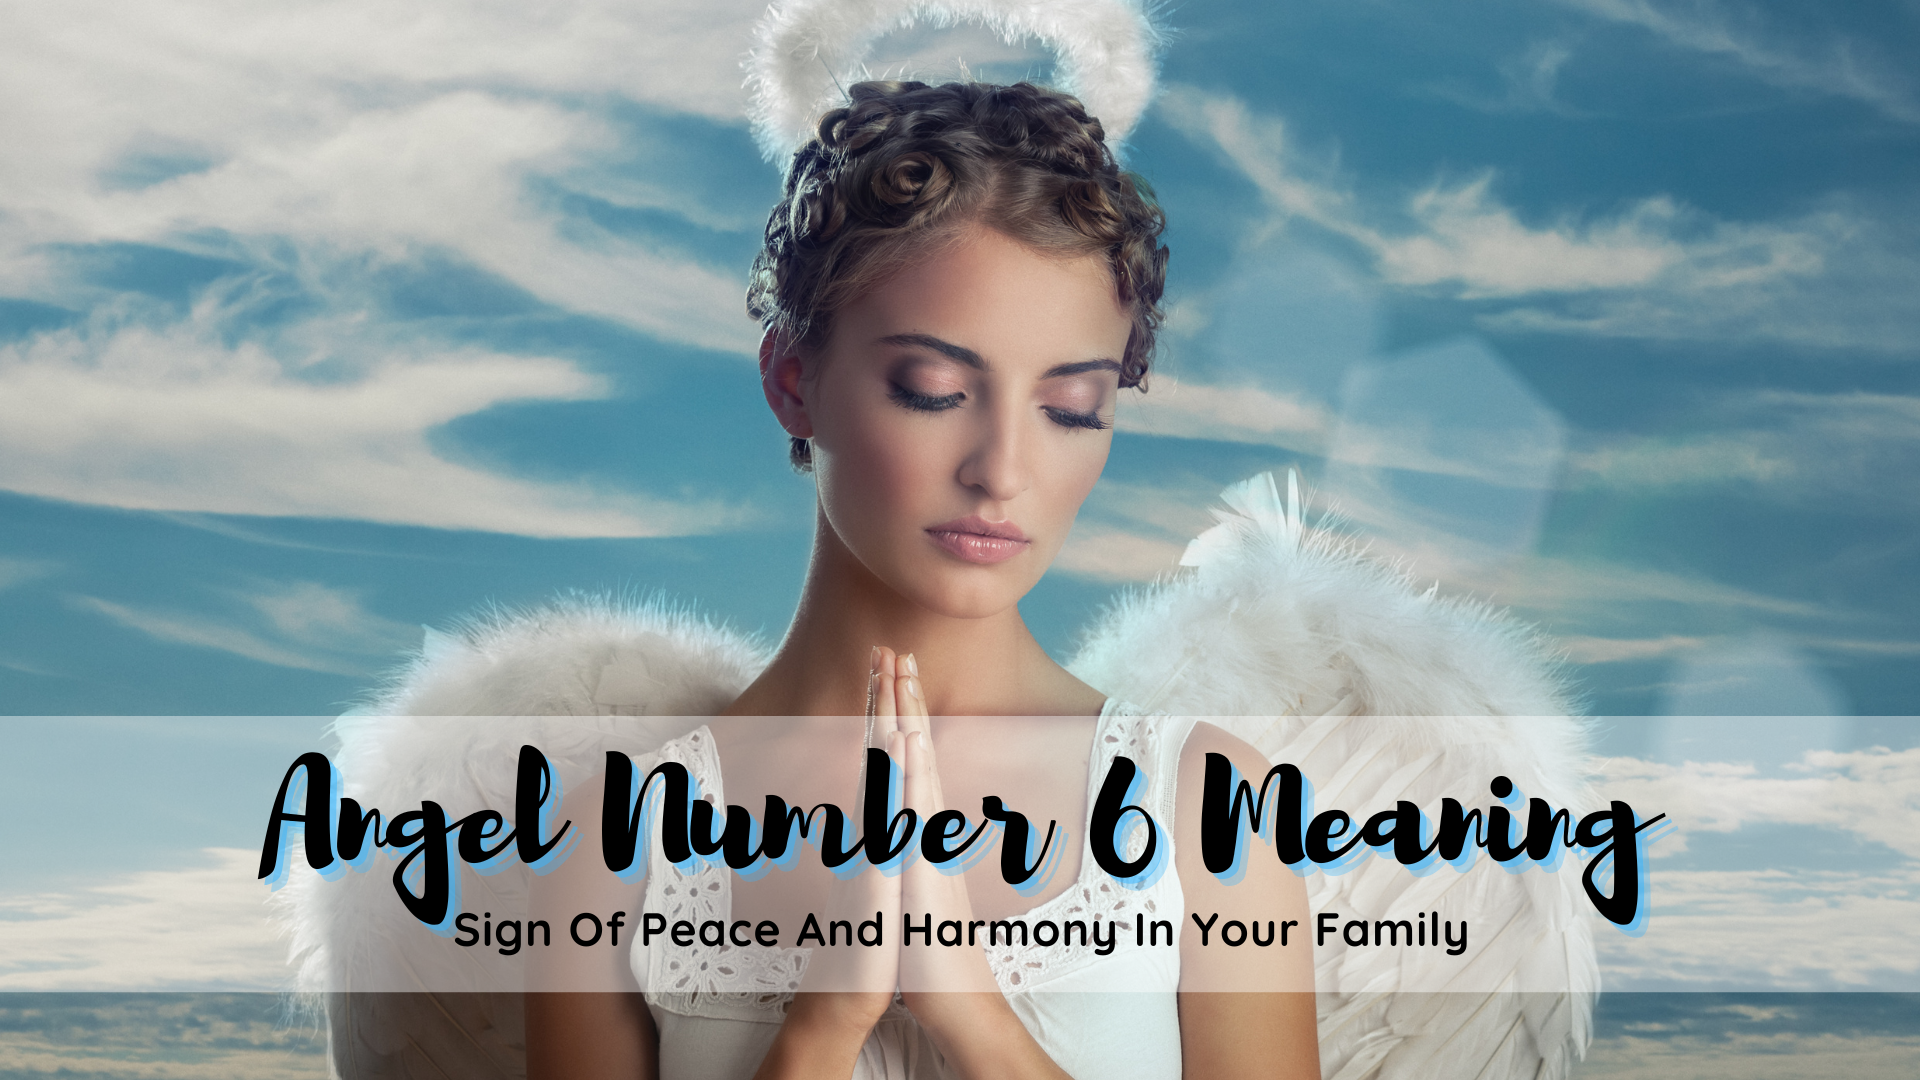 Angel Number 6 Meaning - Sign Of Peace And Harmony In Your Family